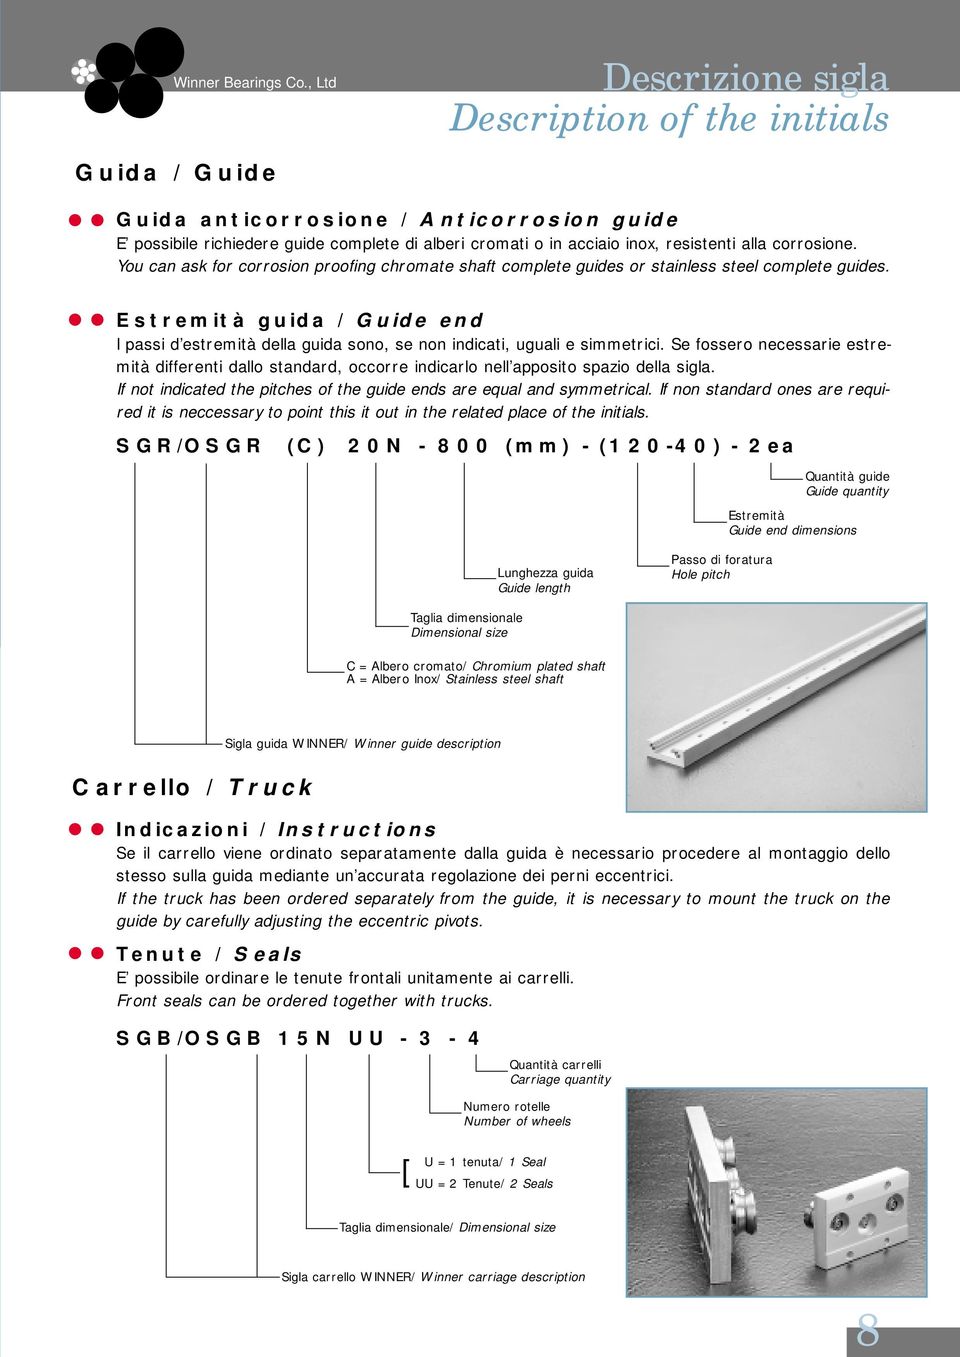 corrosione. You can ask for corrosion proofing chromate shaft complete guides or stainless steel complete guides.